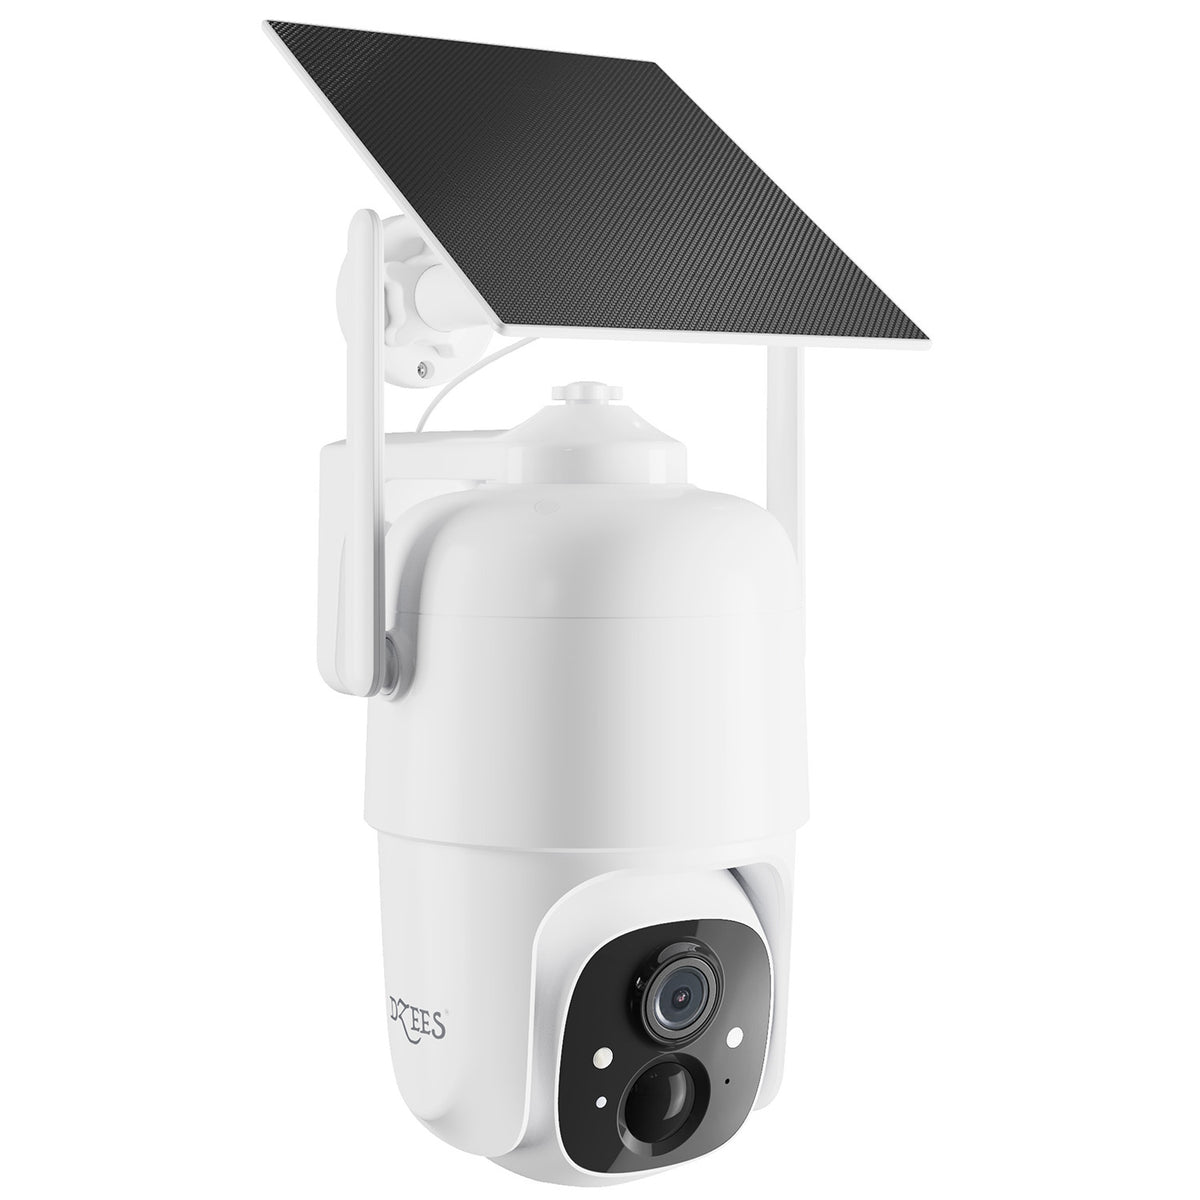 D3K PTZ wireless security camera with solar panel